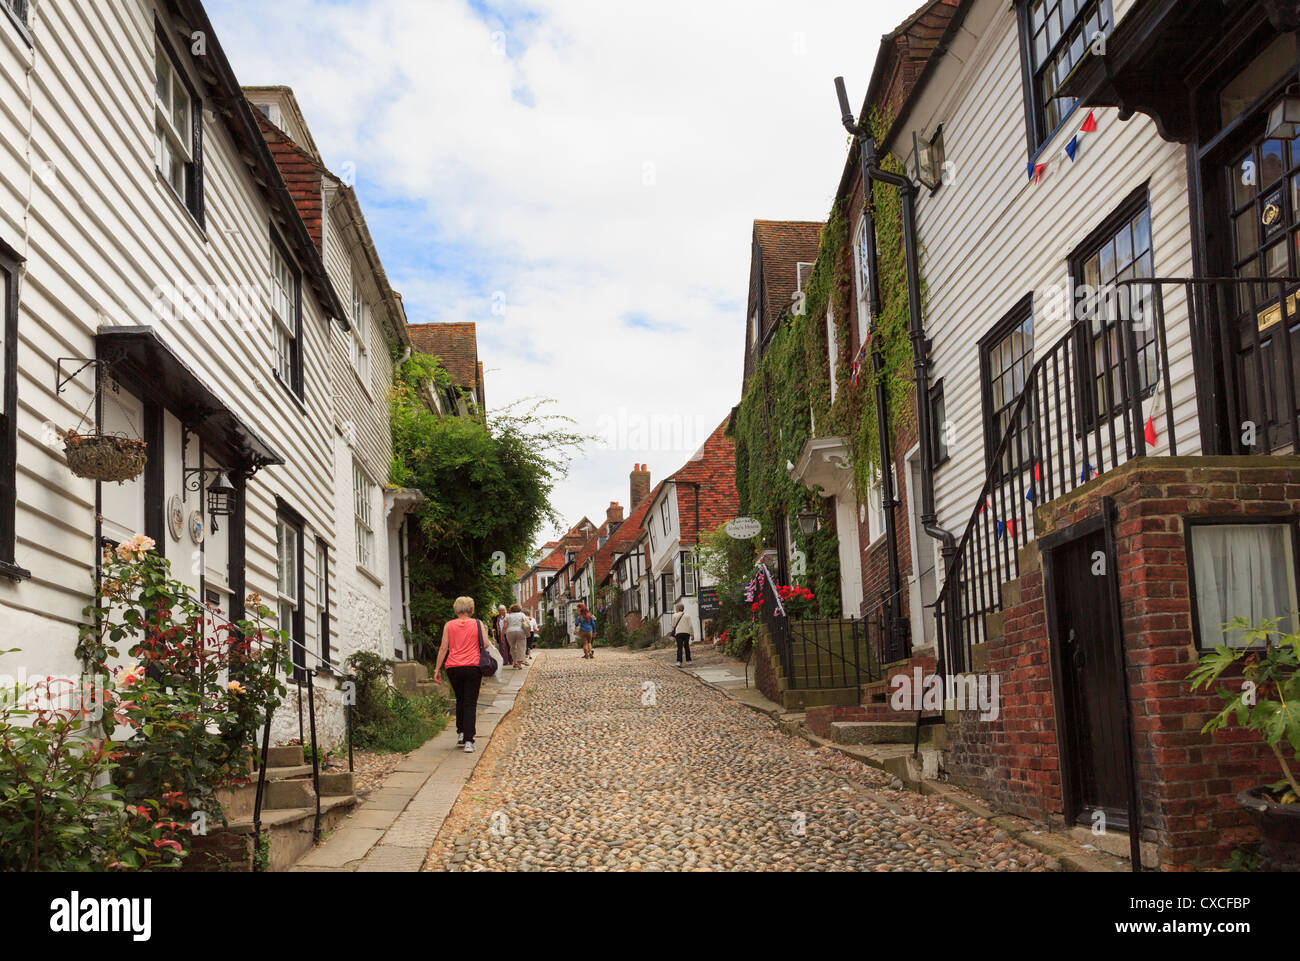 View up the famous narrow cobbled street lined with quaint old houses in Mermaid Street, Rye, East Sussex, England, UK, Britain Stock Photo